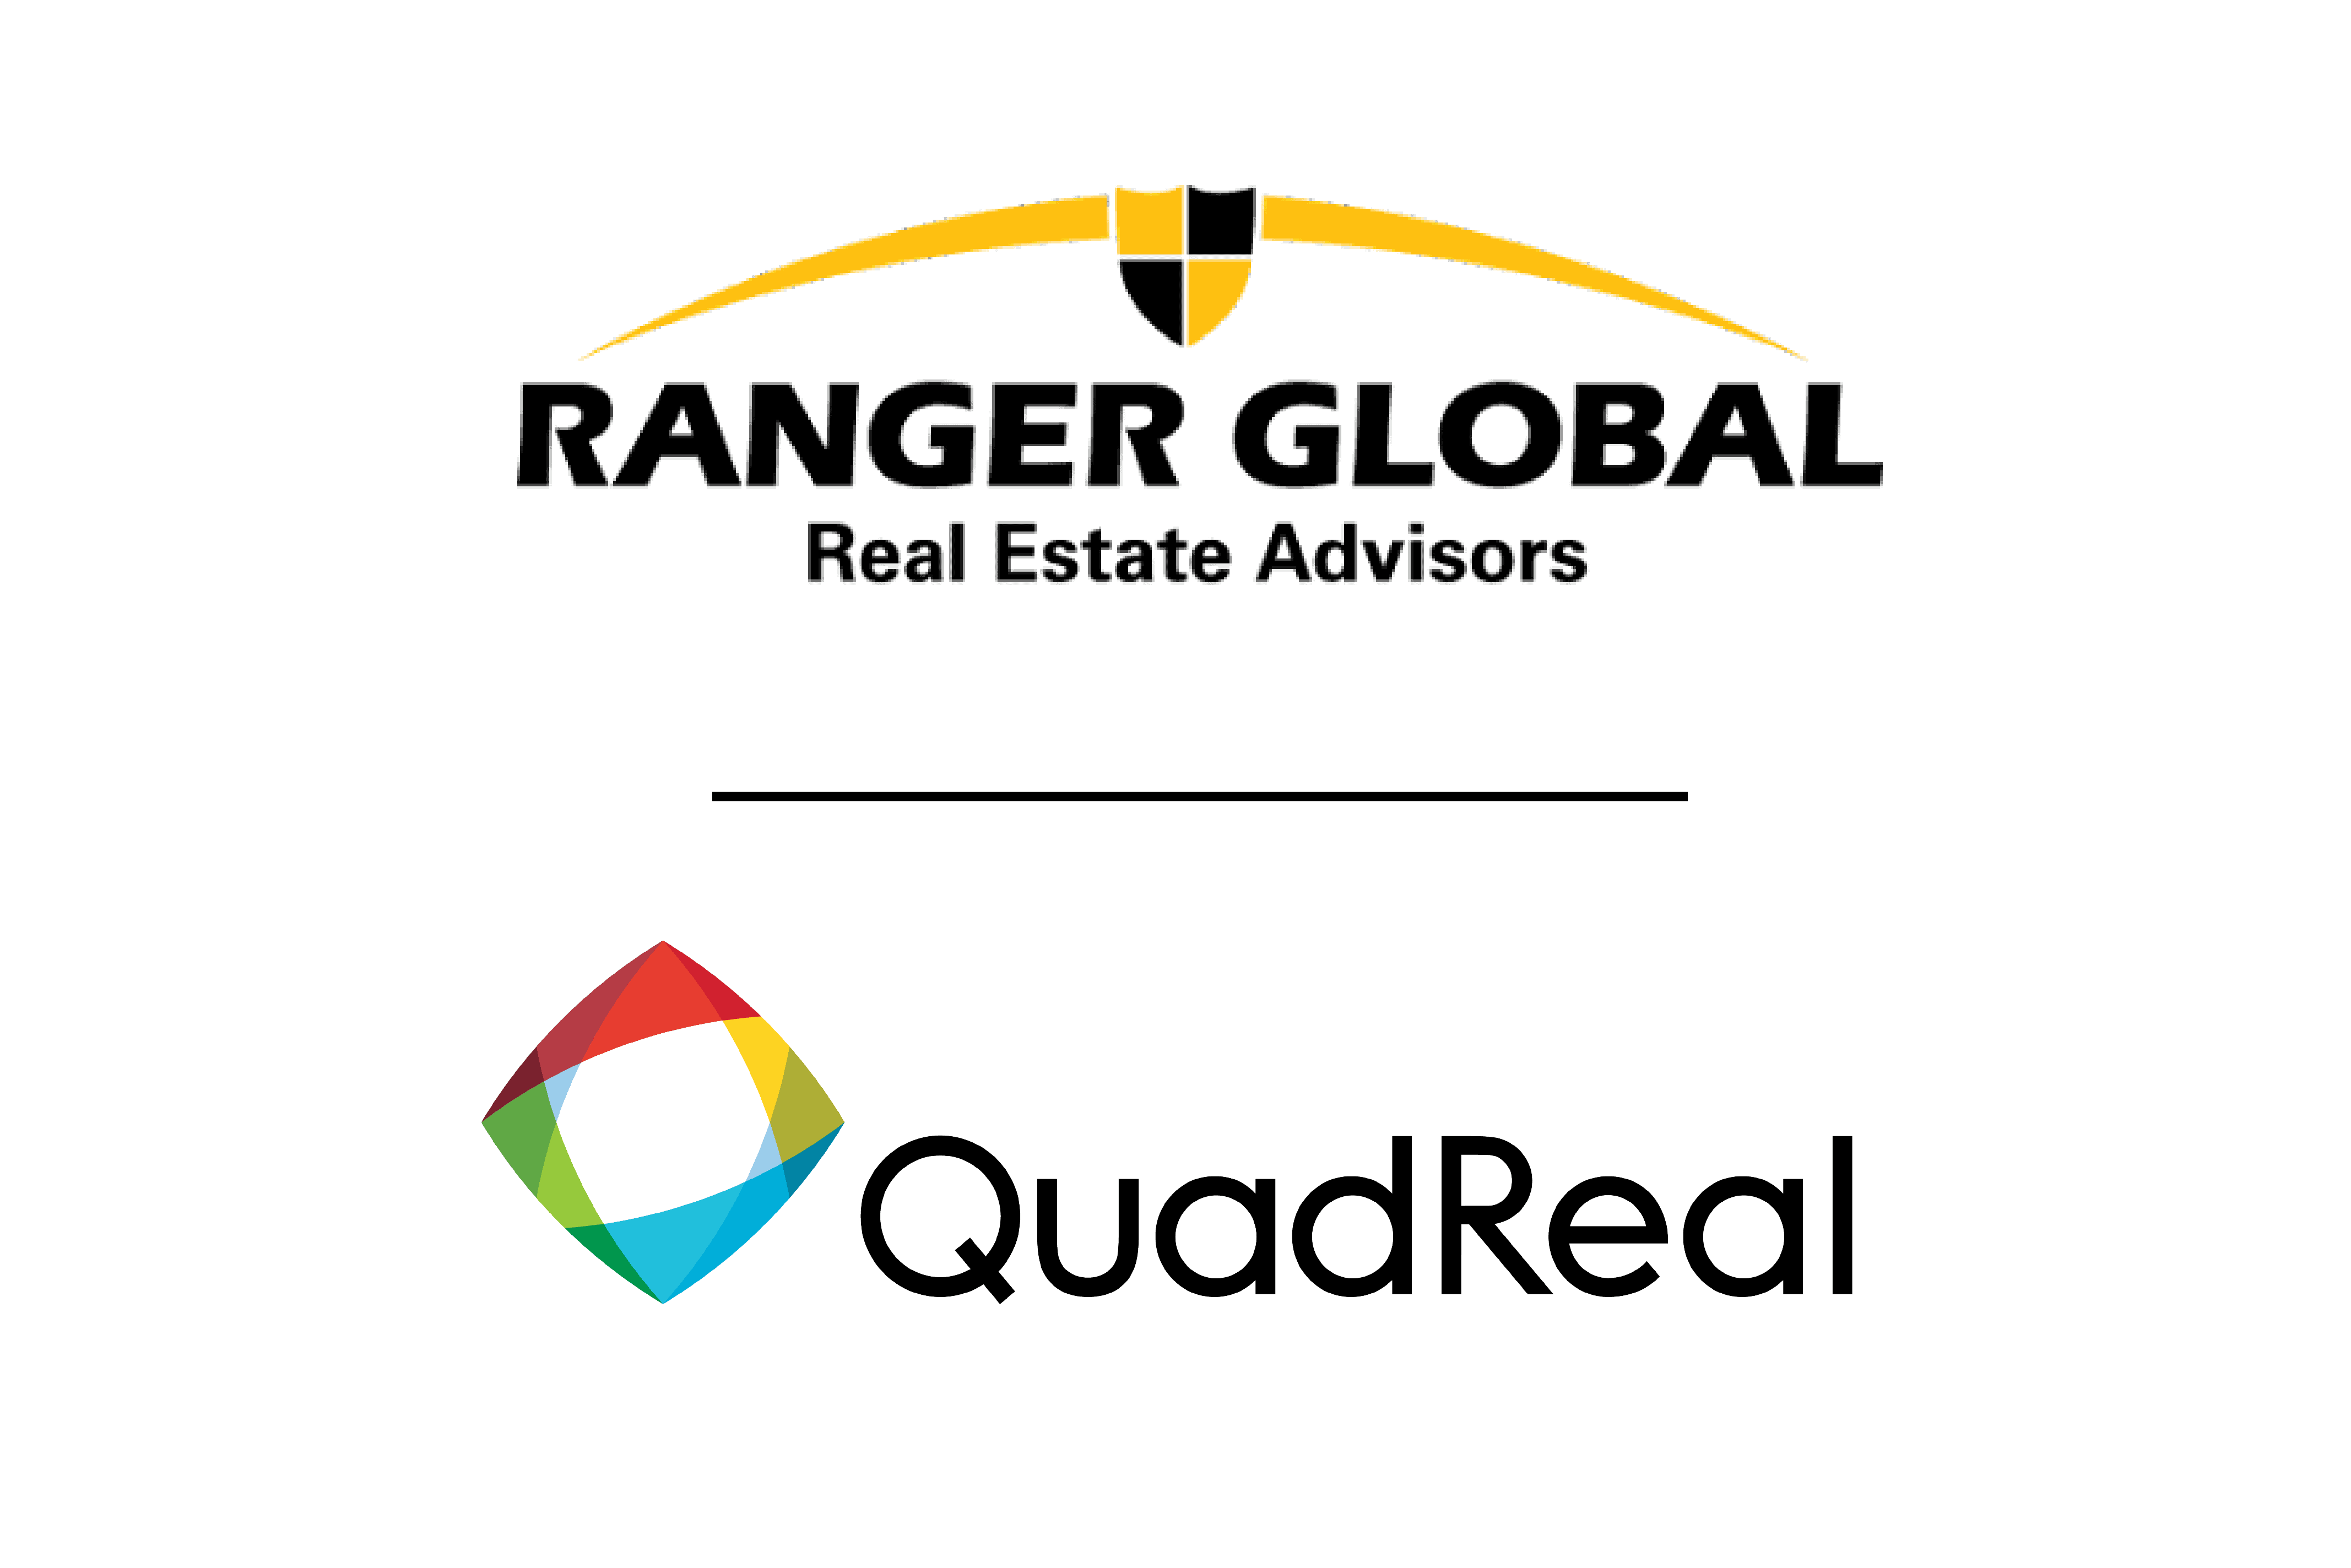 QuadReal Invests US$1 Billion with Ranger Global as Foundation for New Strategic Partnership